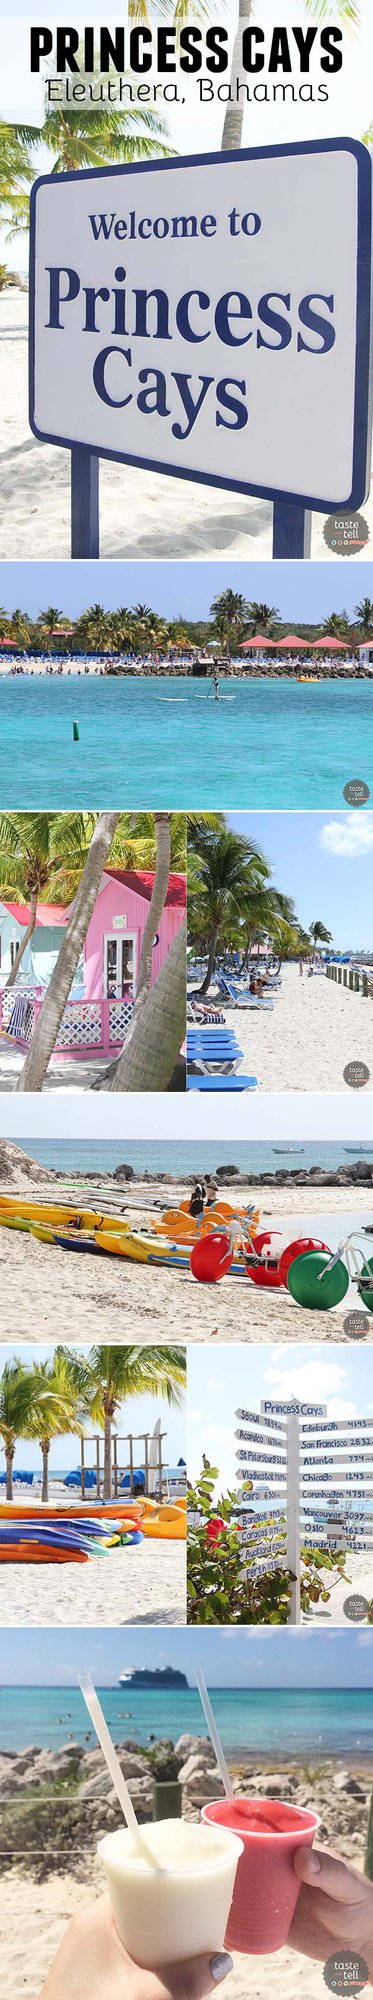 A look at Princess Cays – Princess Cruises exclusive port of call on the island Eleuthera in the Bahamas. Relax on the white sand beaches or participate in a variety of water sports.